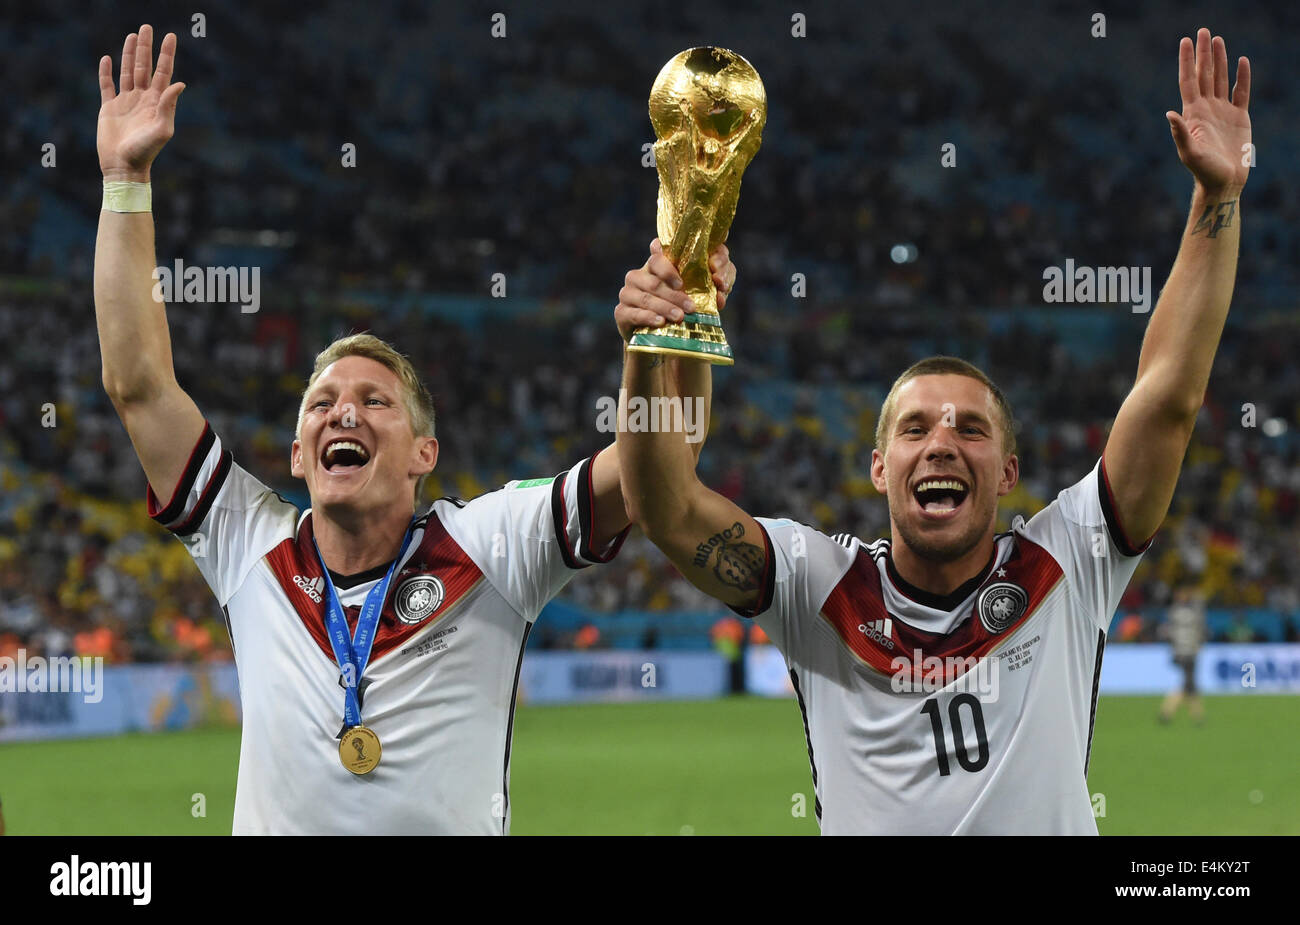 Bastian Schweinsteiger (L) and Lukas Podolski celebrate with the trophy after winning the FIFA World Cup 2014 final soccer match between Germany and Argentina at the Estadio do Maracana in Rio de Janeiro, Brazil, 13 July 2014. Photo: Andreas Gebert/dpa (RESTRICTIONS APPLY: Editorial Use Only, not used in association with any commercial entity - Images must not be used in any form of alert service or push service of any kind including via mobile alert services, downloads to mobile devices or MMS messaging - Images must appear as cstill images and must not emulate match action video footage - No Stock Photo